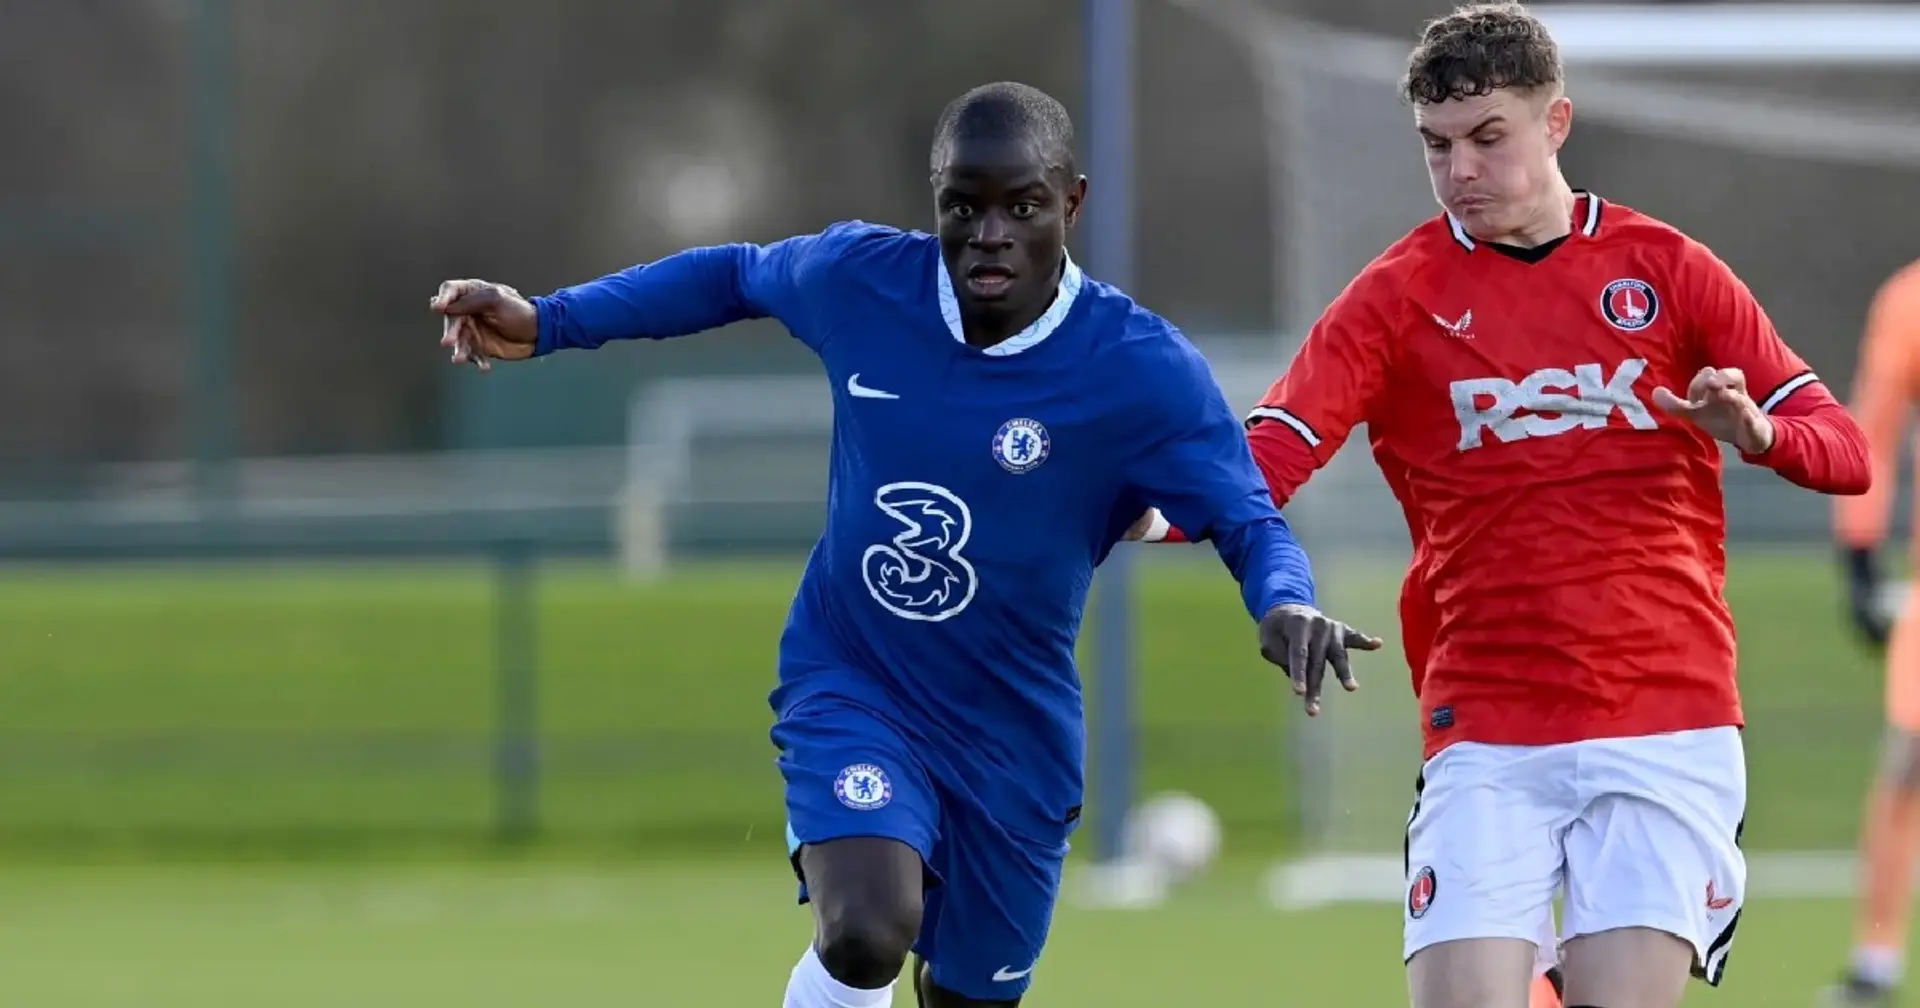 Kante plays 60 minutes in behind closed doors friendly win - 5 images